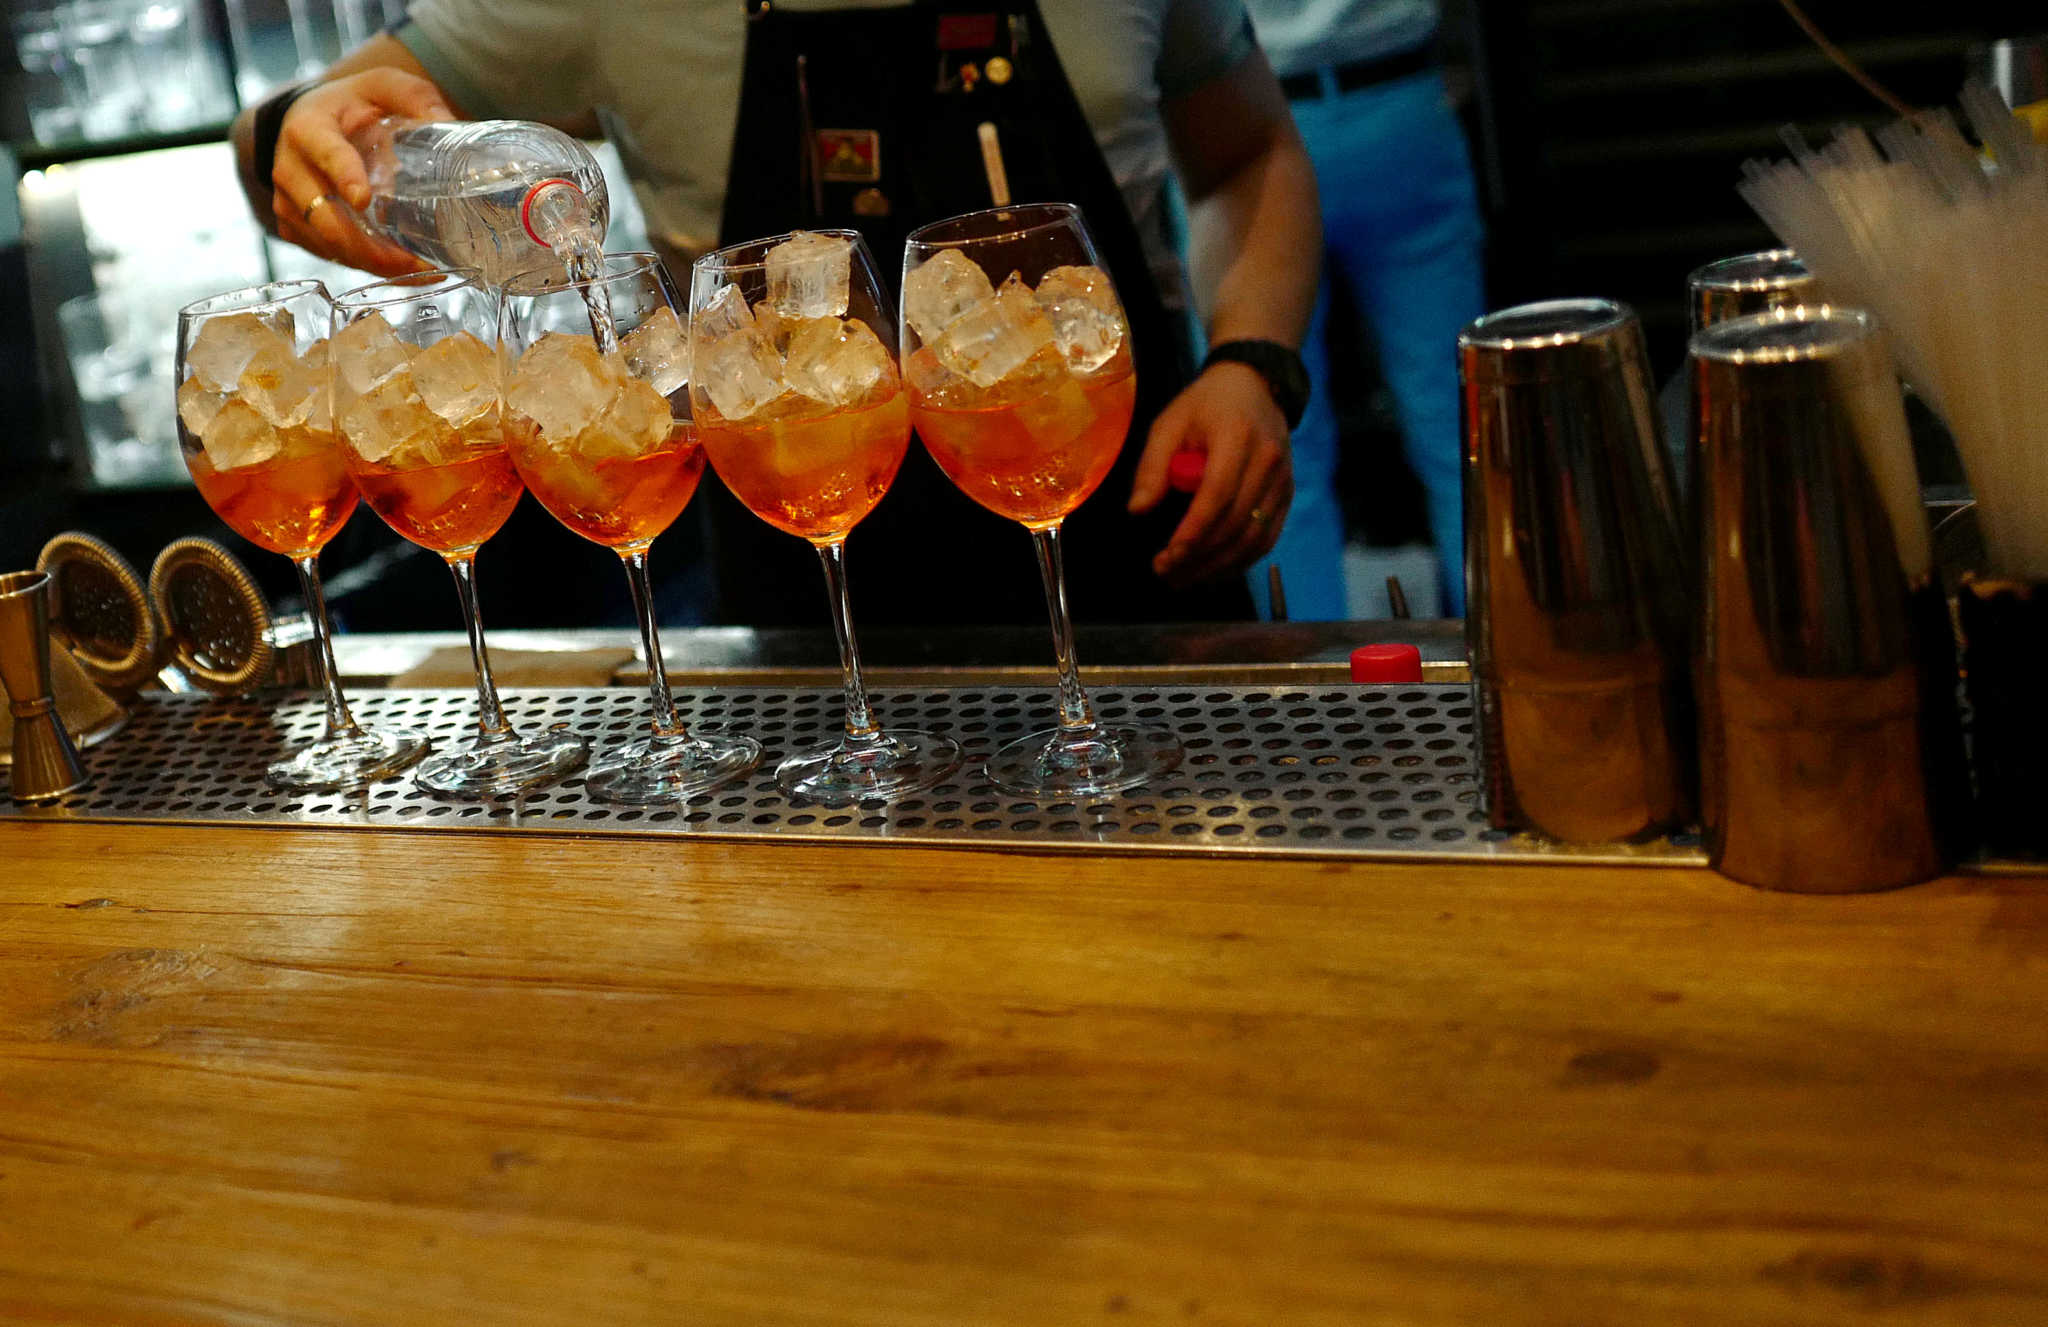 FILE PHOTO: A bartender prepares five Aperol Spritz drinks at a bar in Moscow, Russia July 13, 2018. REUTERS/Kai Pfaffenbach/File Photo